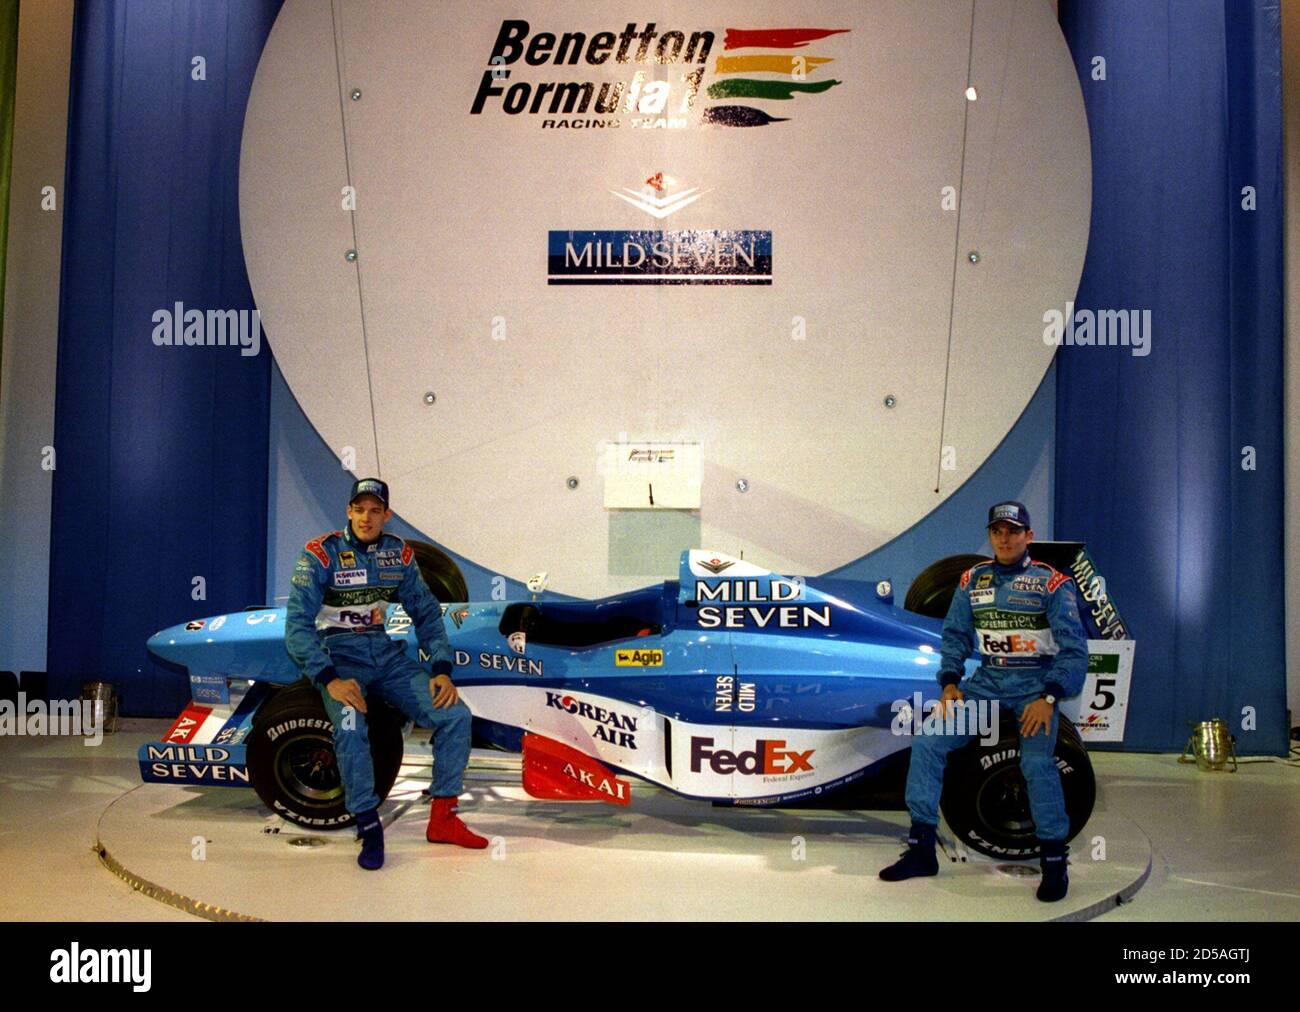 Benetton drivers Alexander Wurz from Austria (L) and Italy's Giancarlo  Fisichella display their team's new Formula One car at its launch January  15. Benetton, an Anglo-Italian team, announced a major new technical